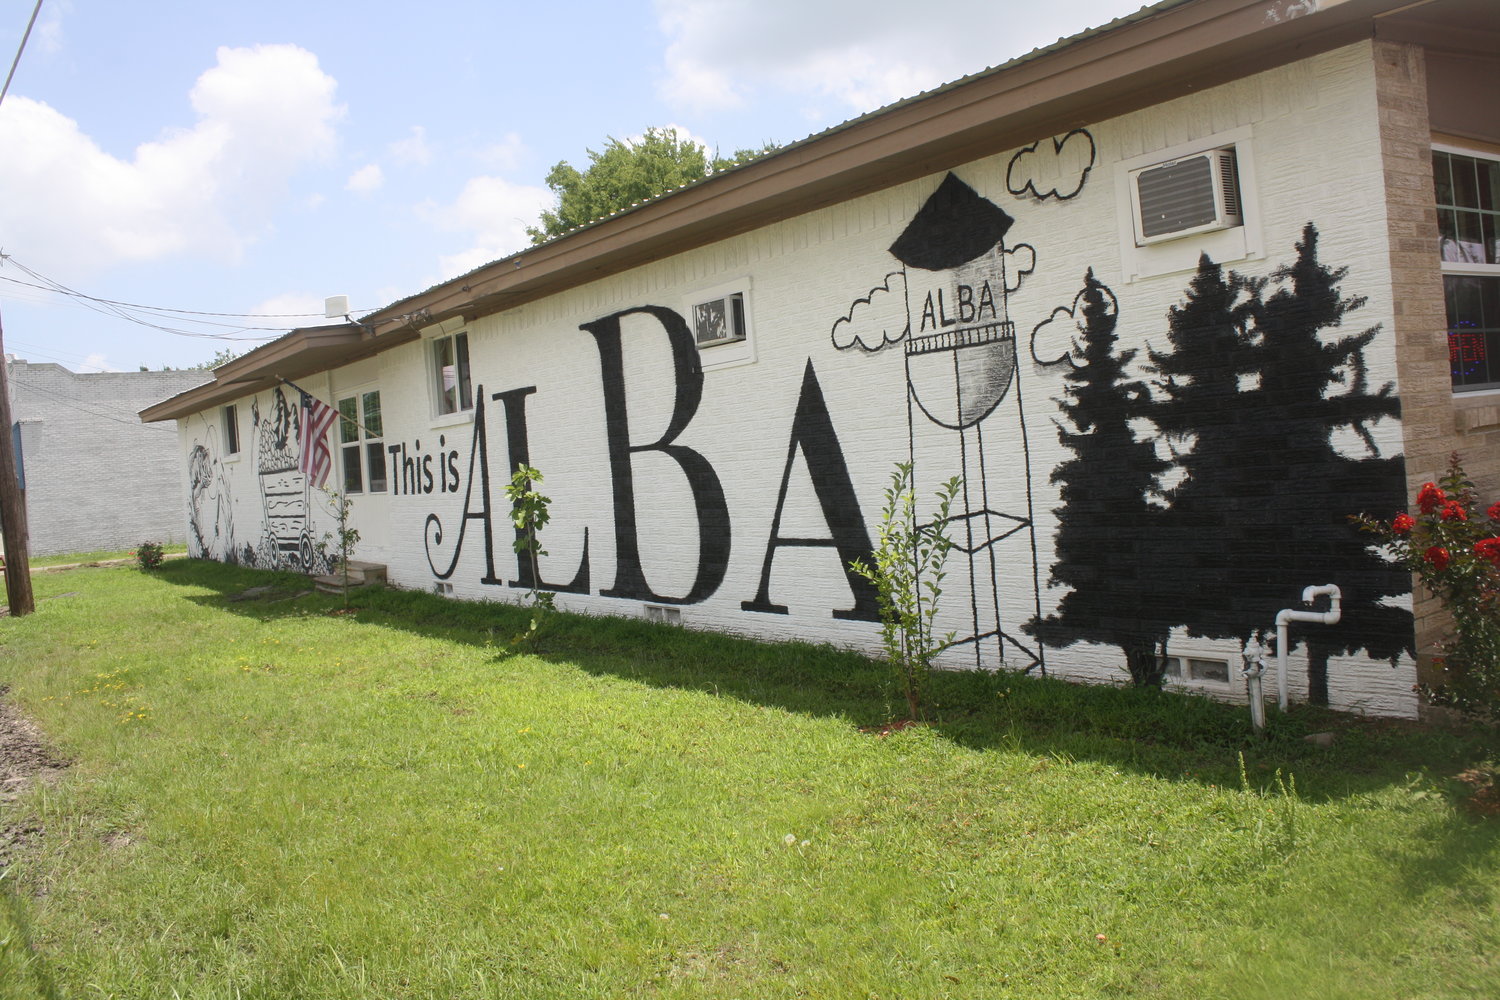 The mural located at antique shop Robin’s Nest at 189 Greenville Street in Alba depicts the origins of the town and its story.